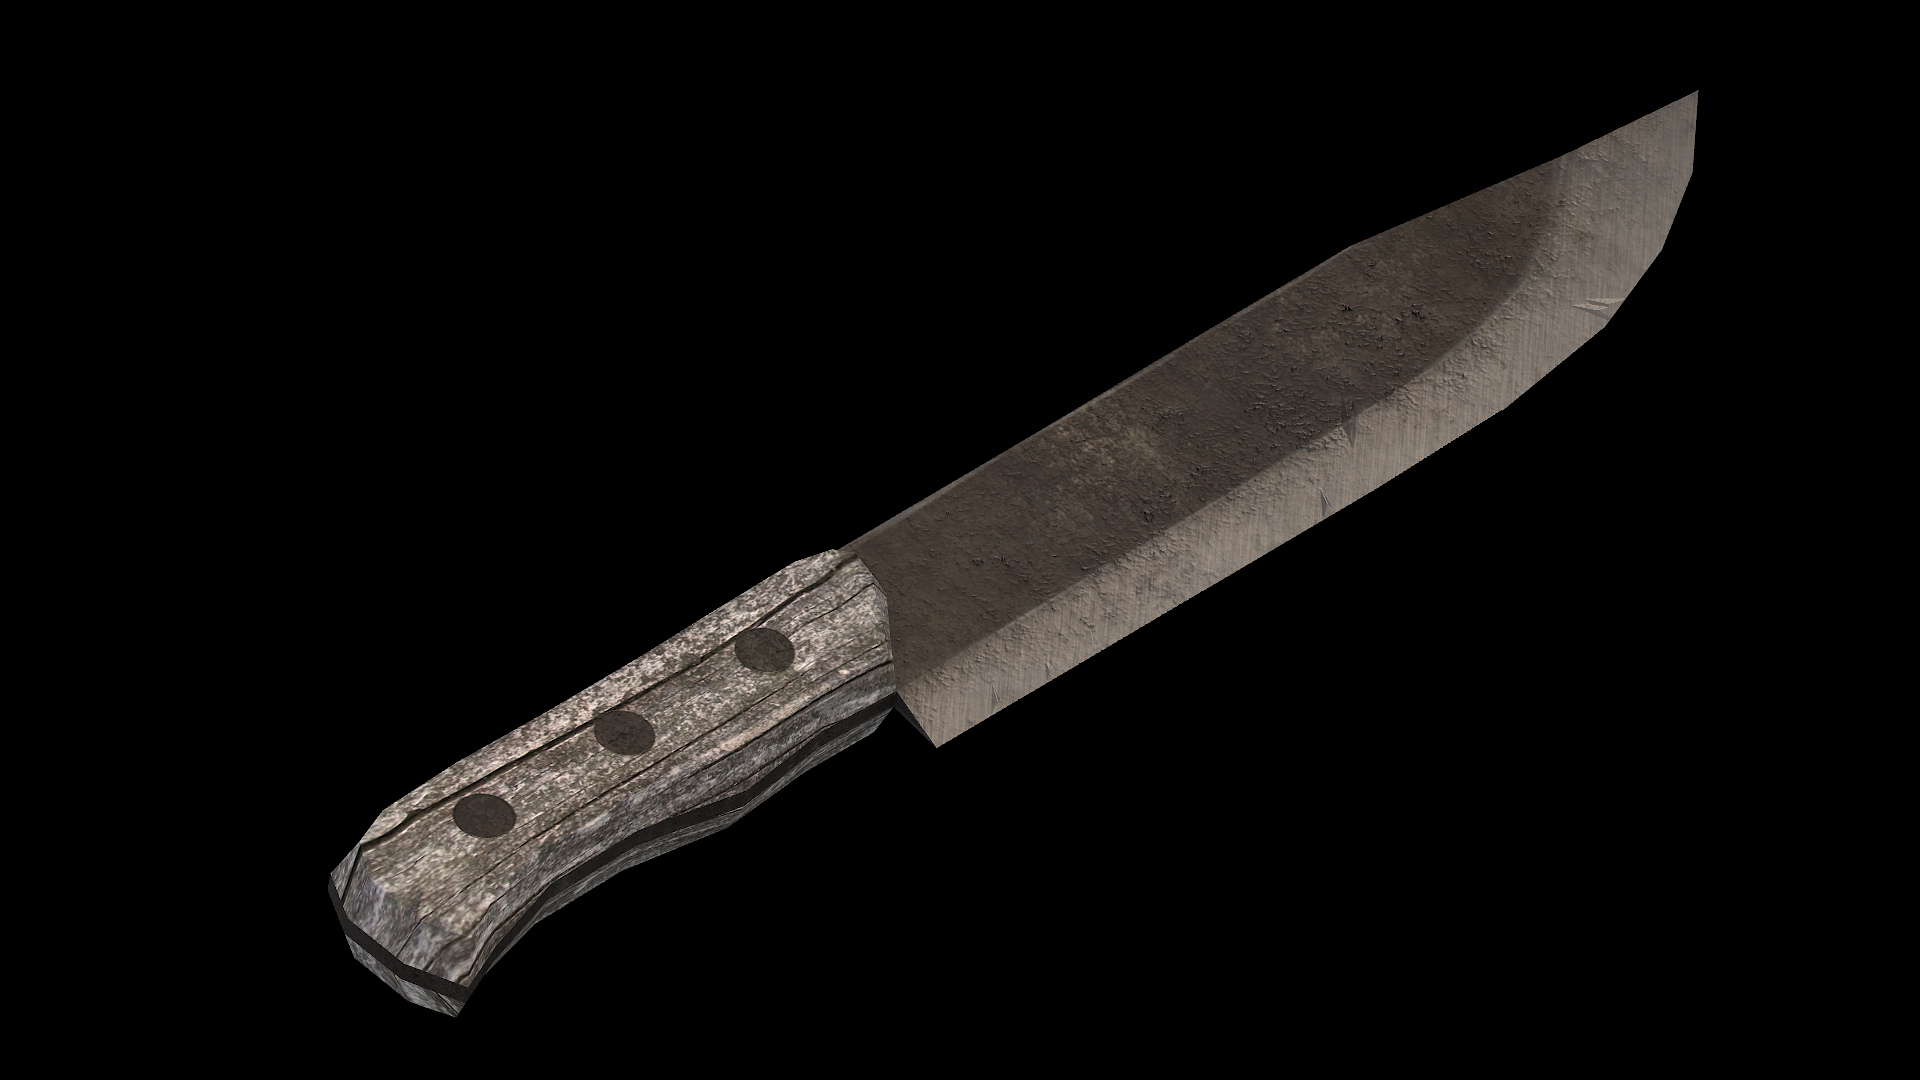 https://opengameart.org/sites/default/files/iron_knife_preview.jpg